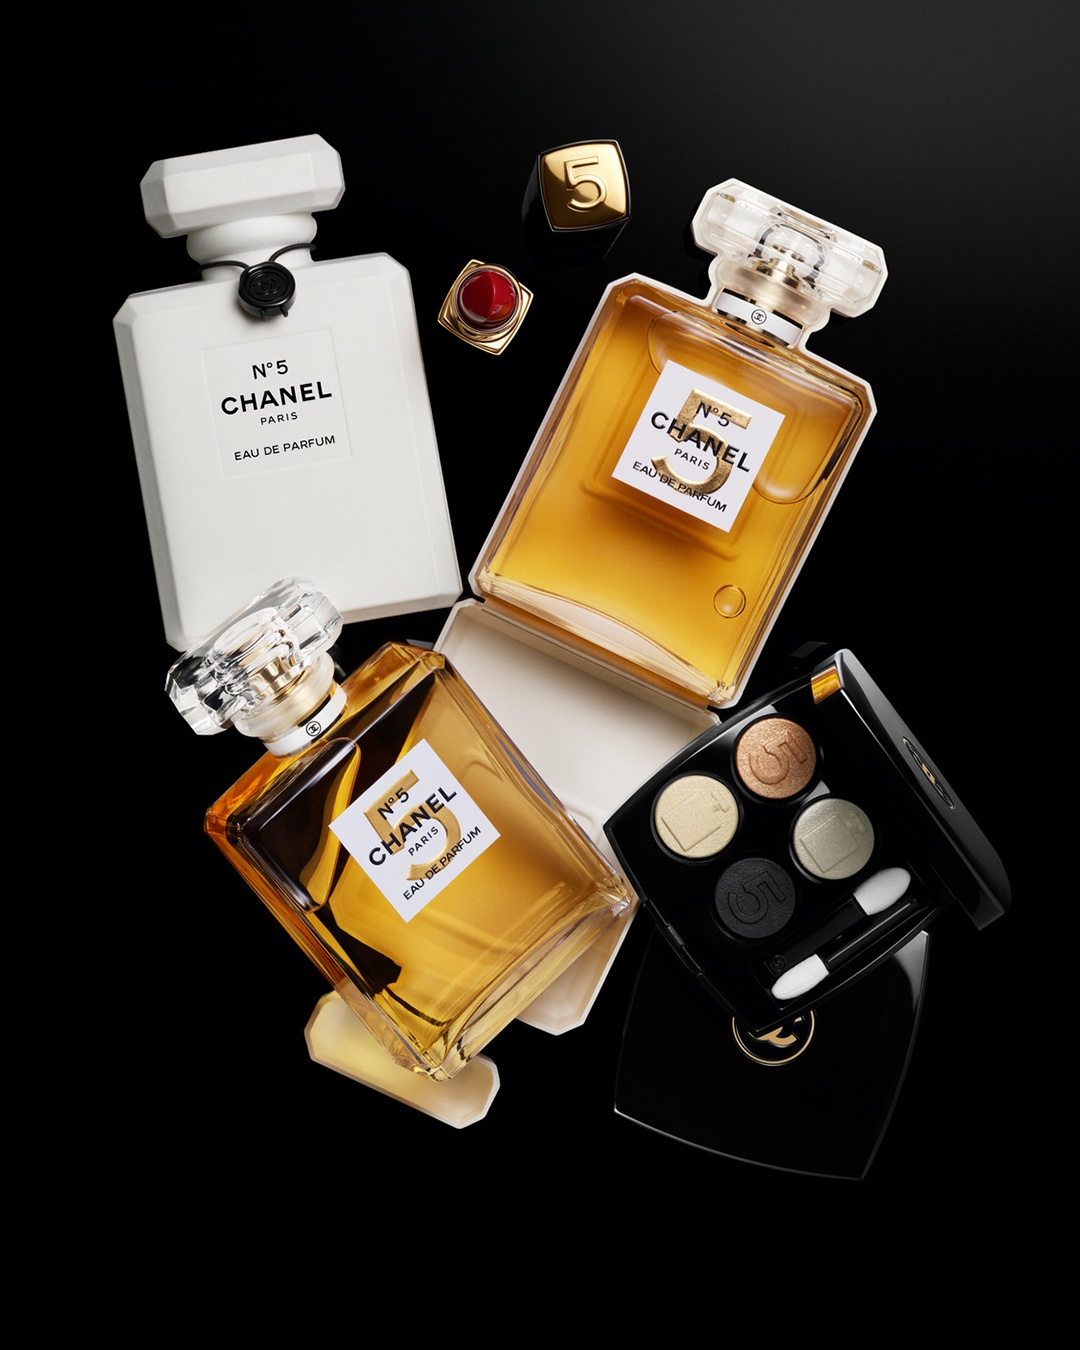 Chanel No. 5 evokes the story of Coco Chanel herself. Image: Chanel